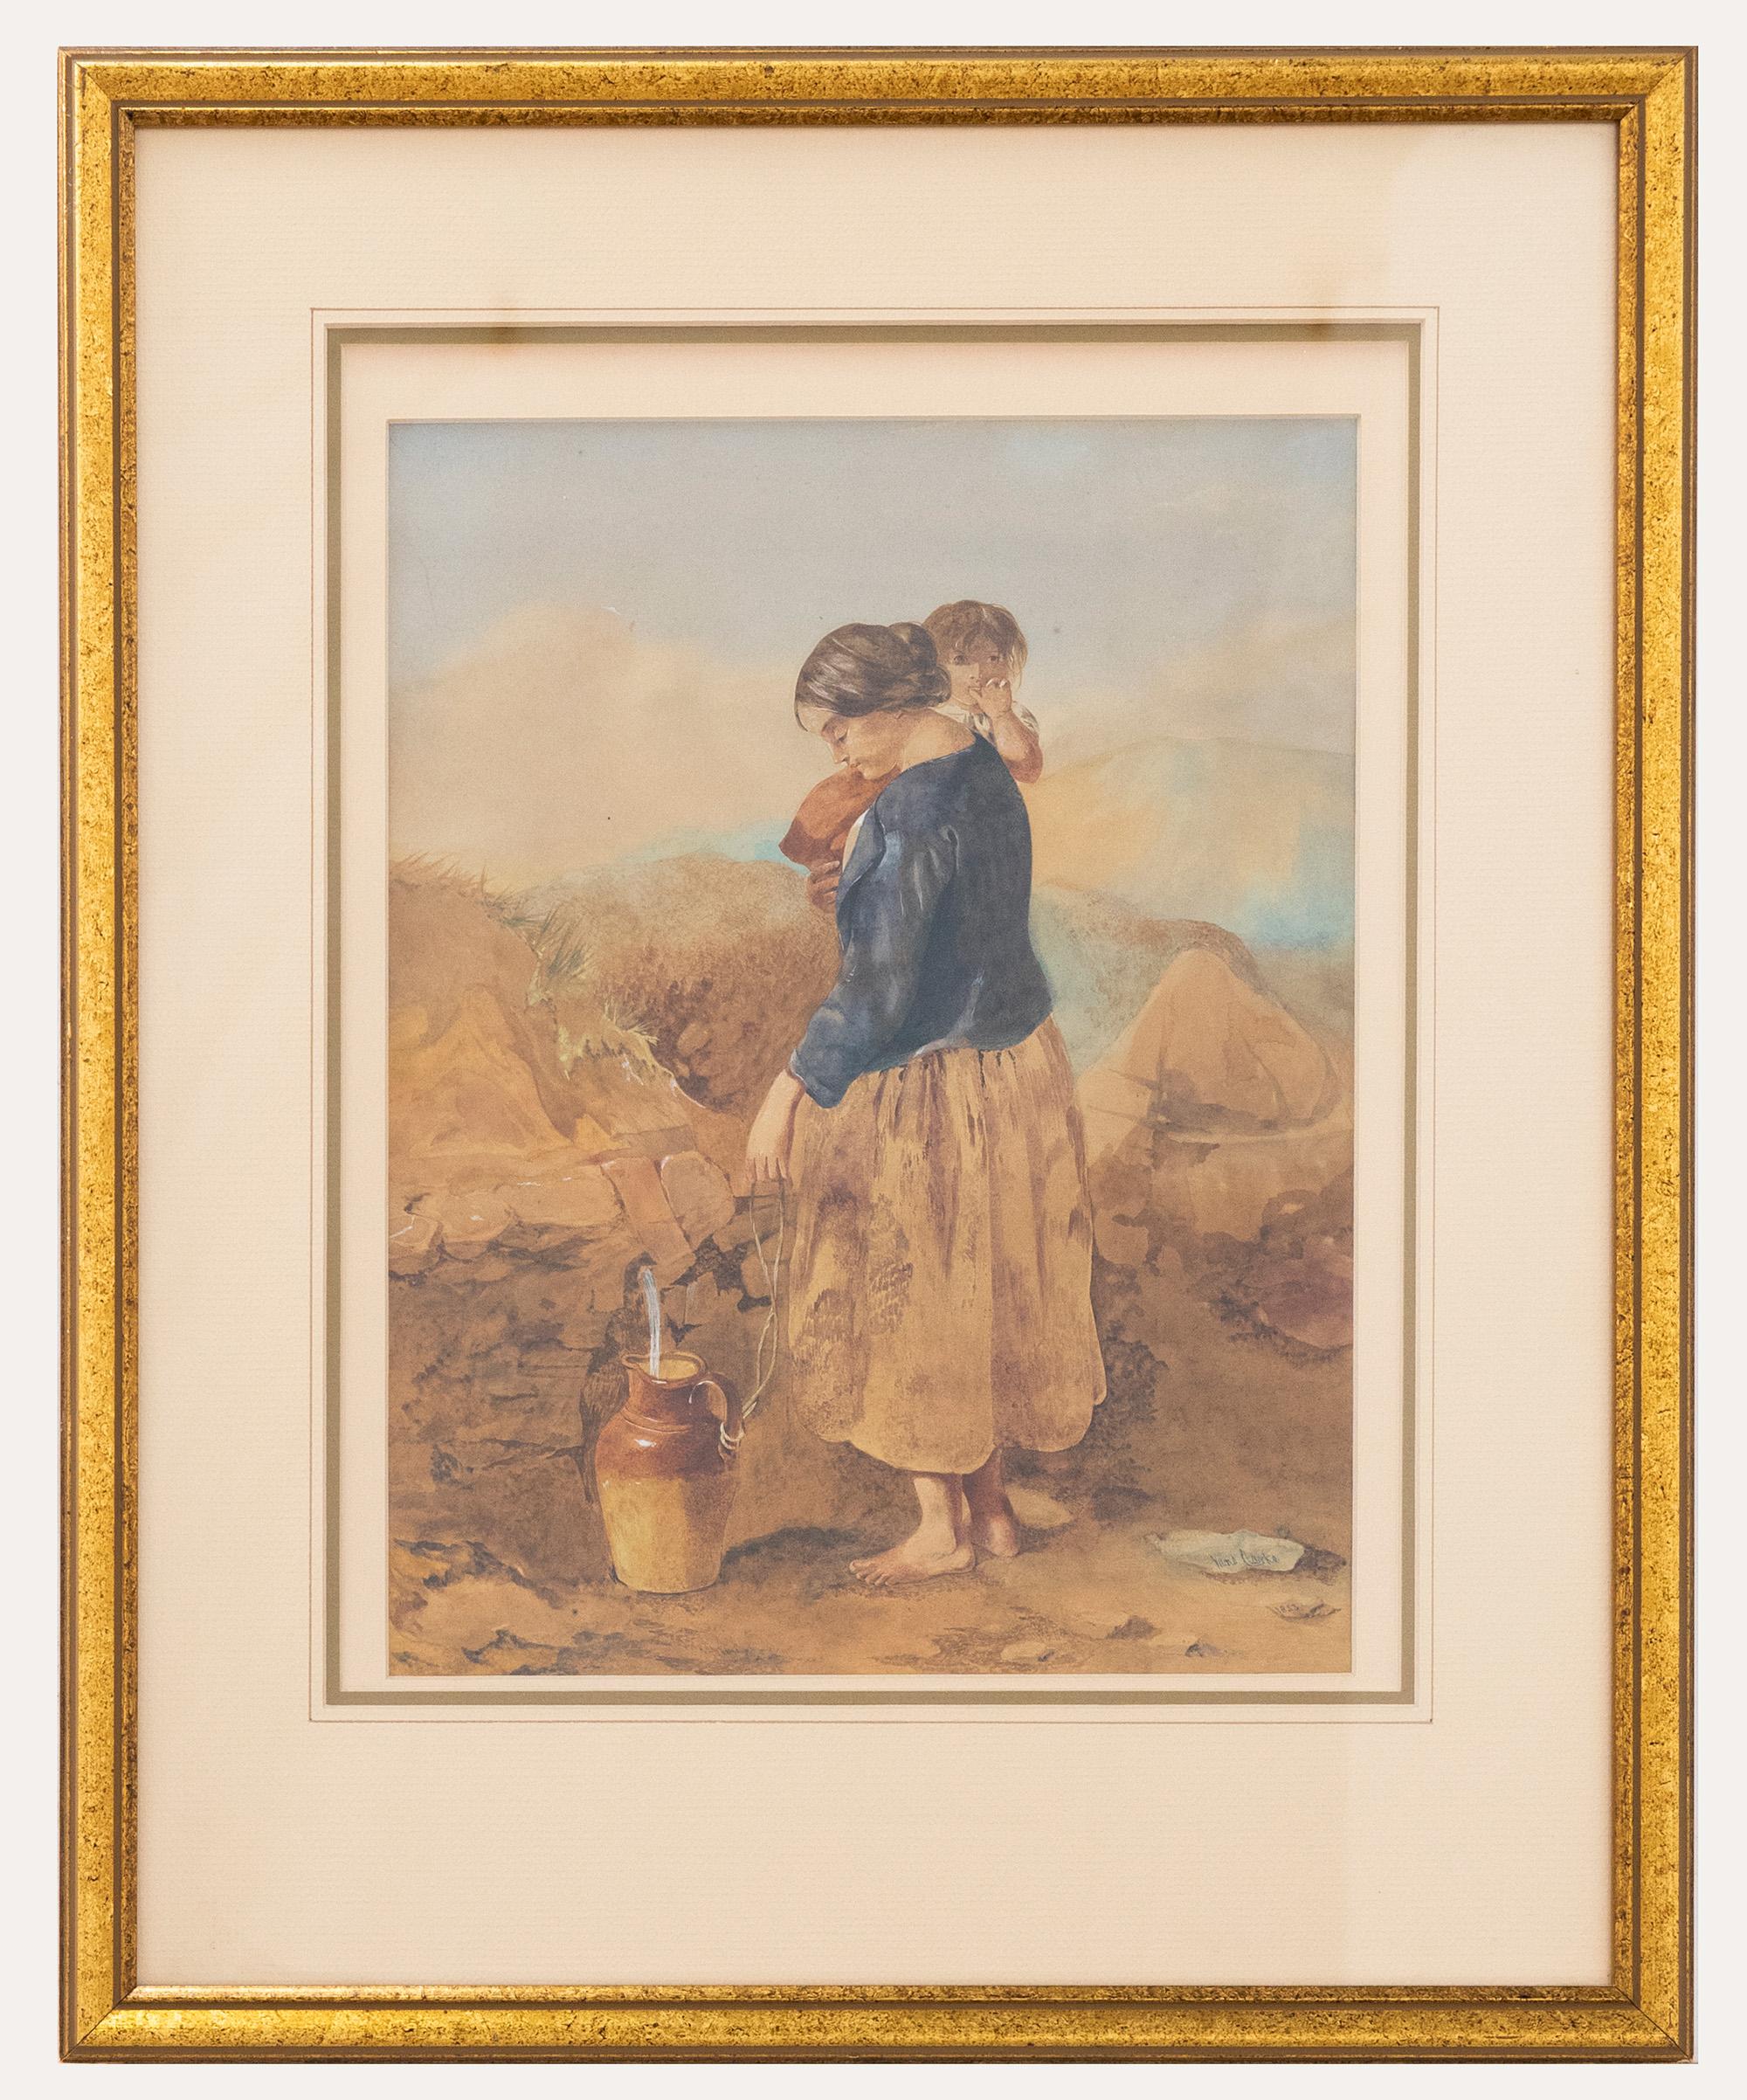 Unknown Portrait - V. Clarke  - 1853 Watercolour, Collecting Water